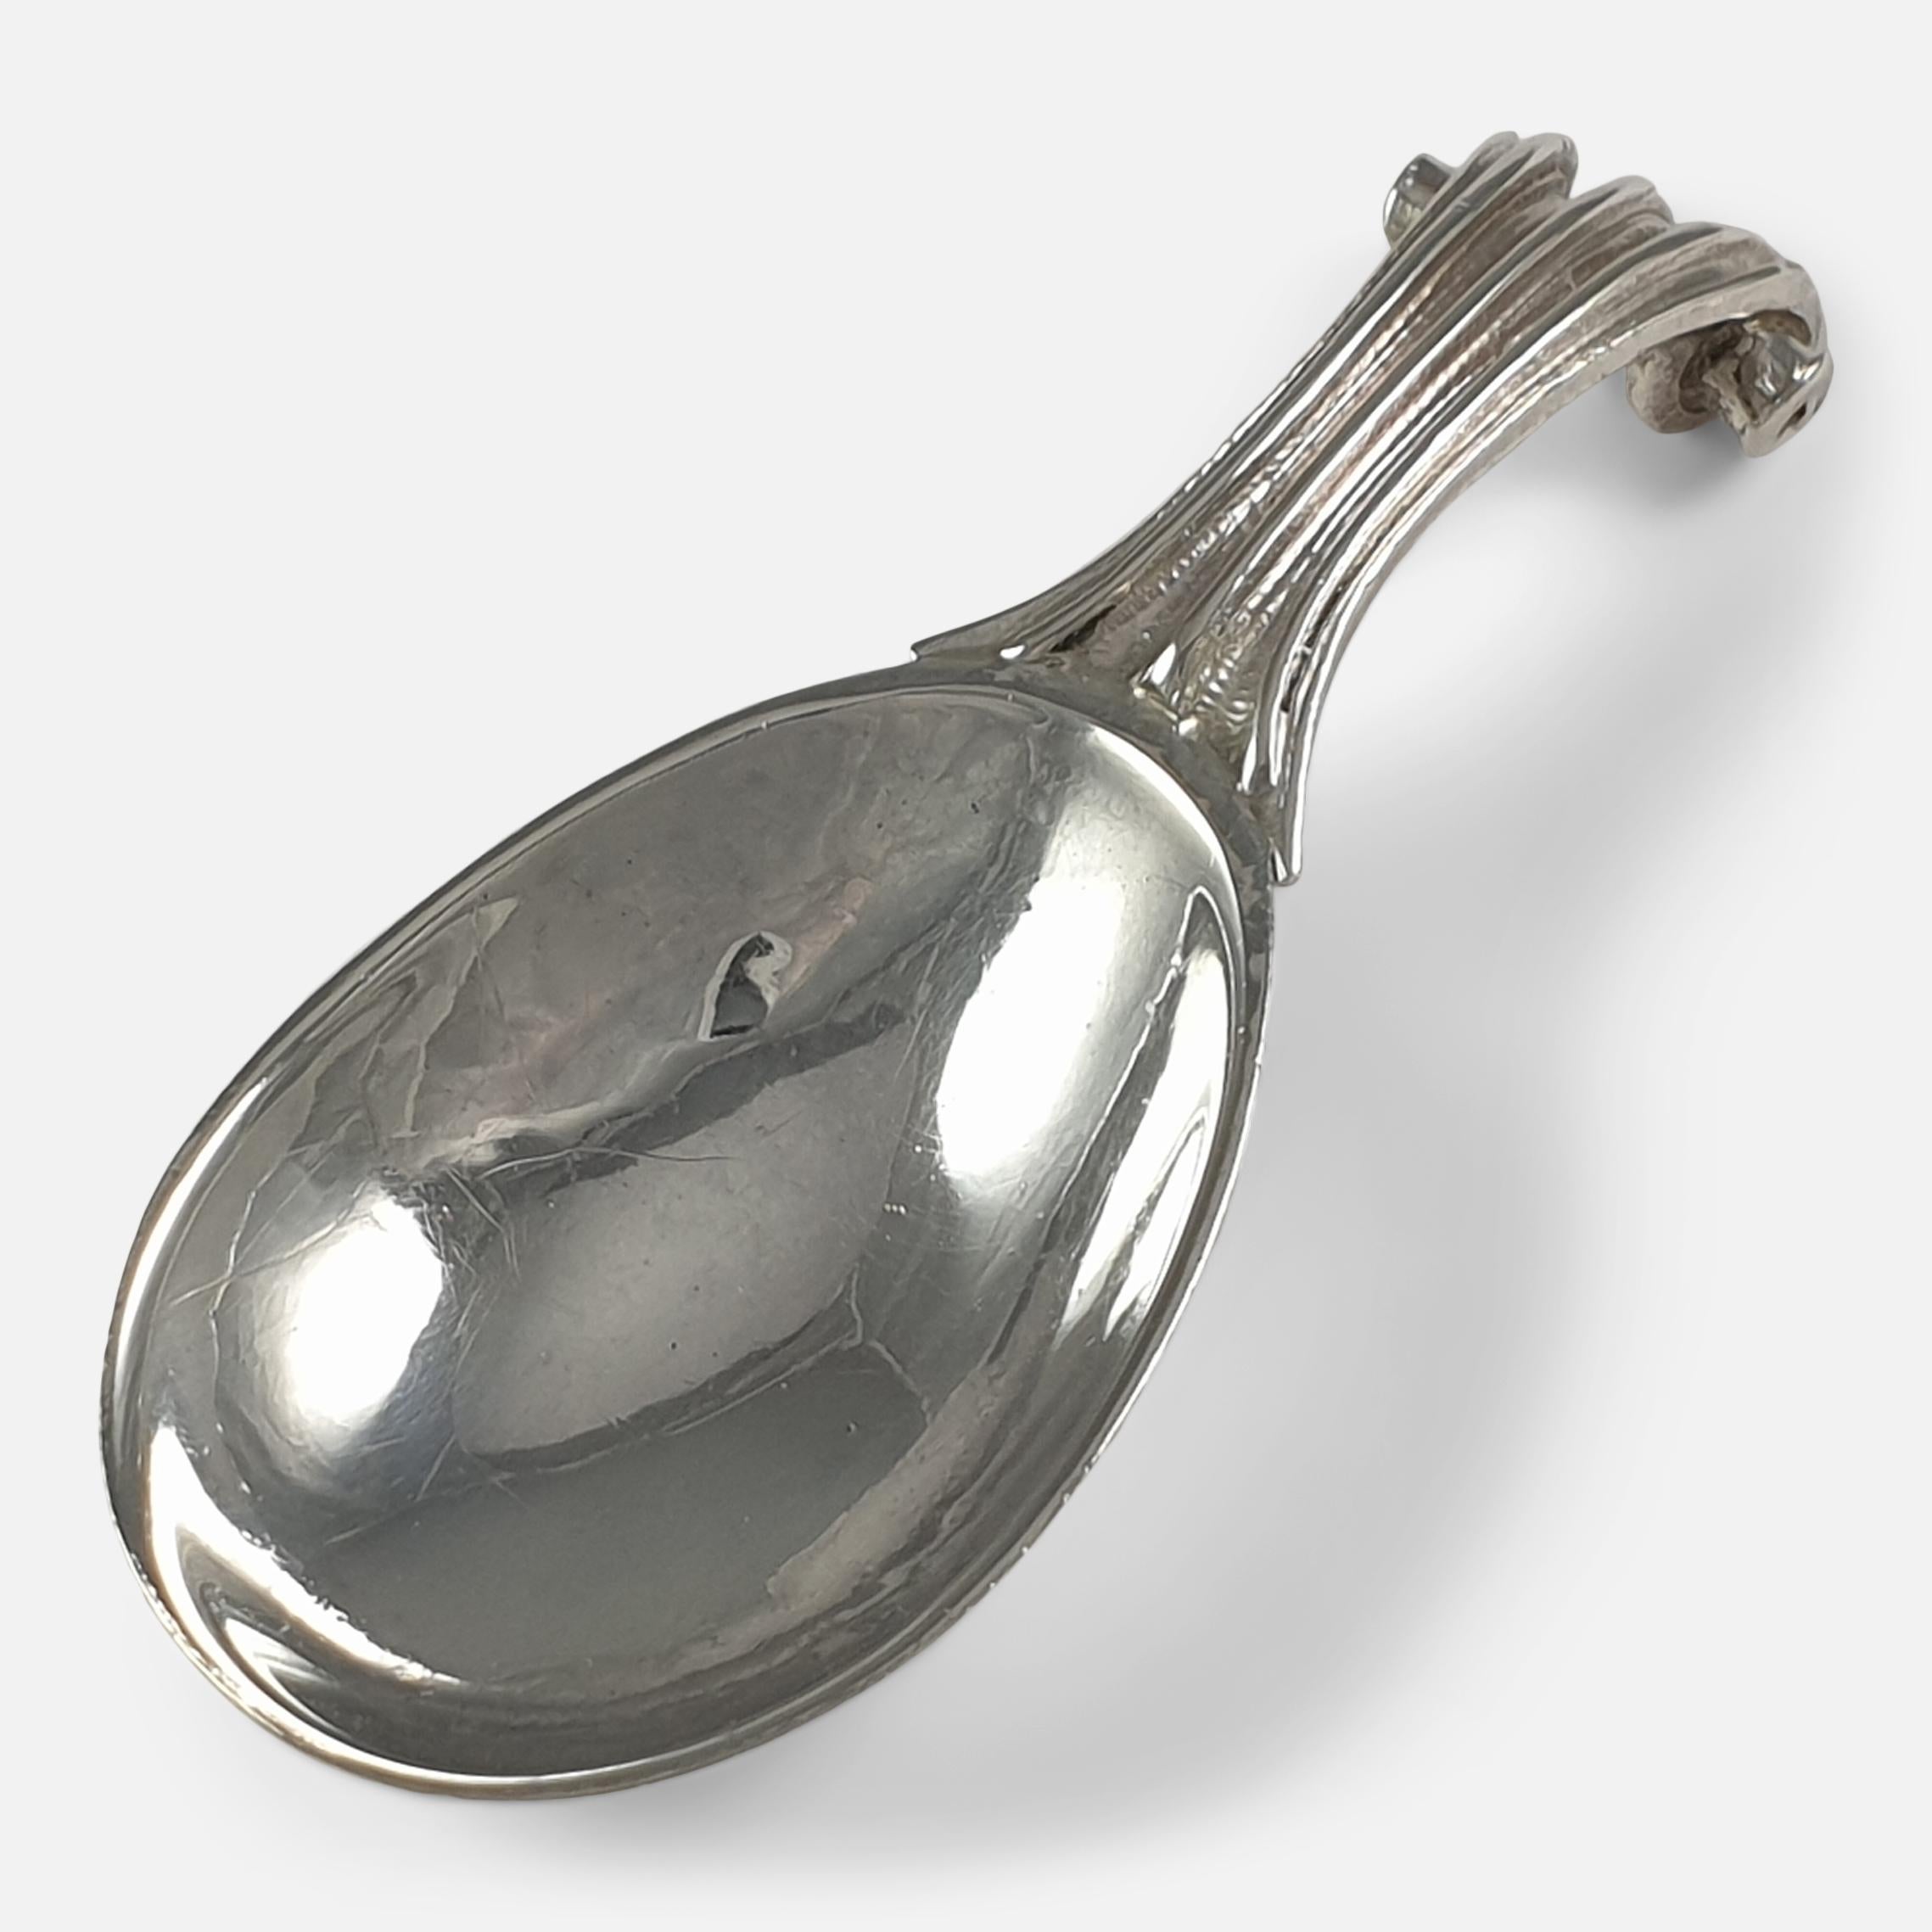 An Arts & Crafts sterling silver tea caddy spoon. The tea caddy spoon has a spot-hammered bowl, and fluted Onslow-style handle. 

Made by the silversmith Omar Ramsden, and hallmarked Birmingham, 1927.

Assay: - .925 Sterling Silver.

Date: -